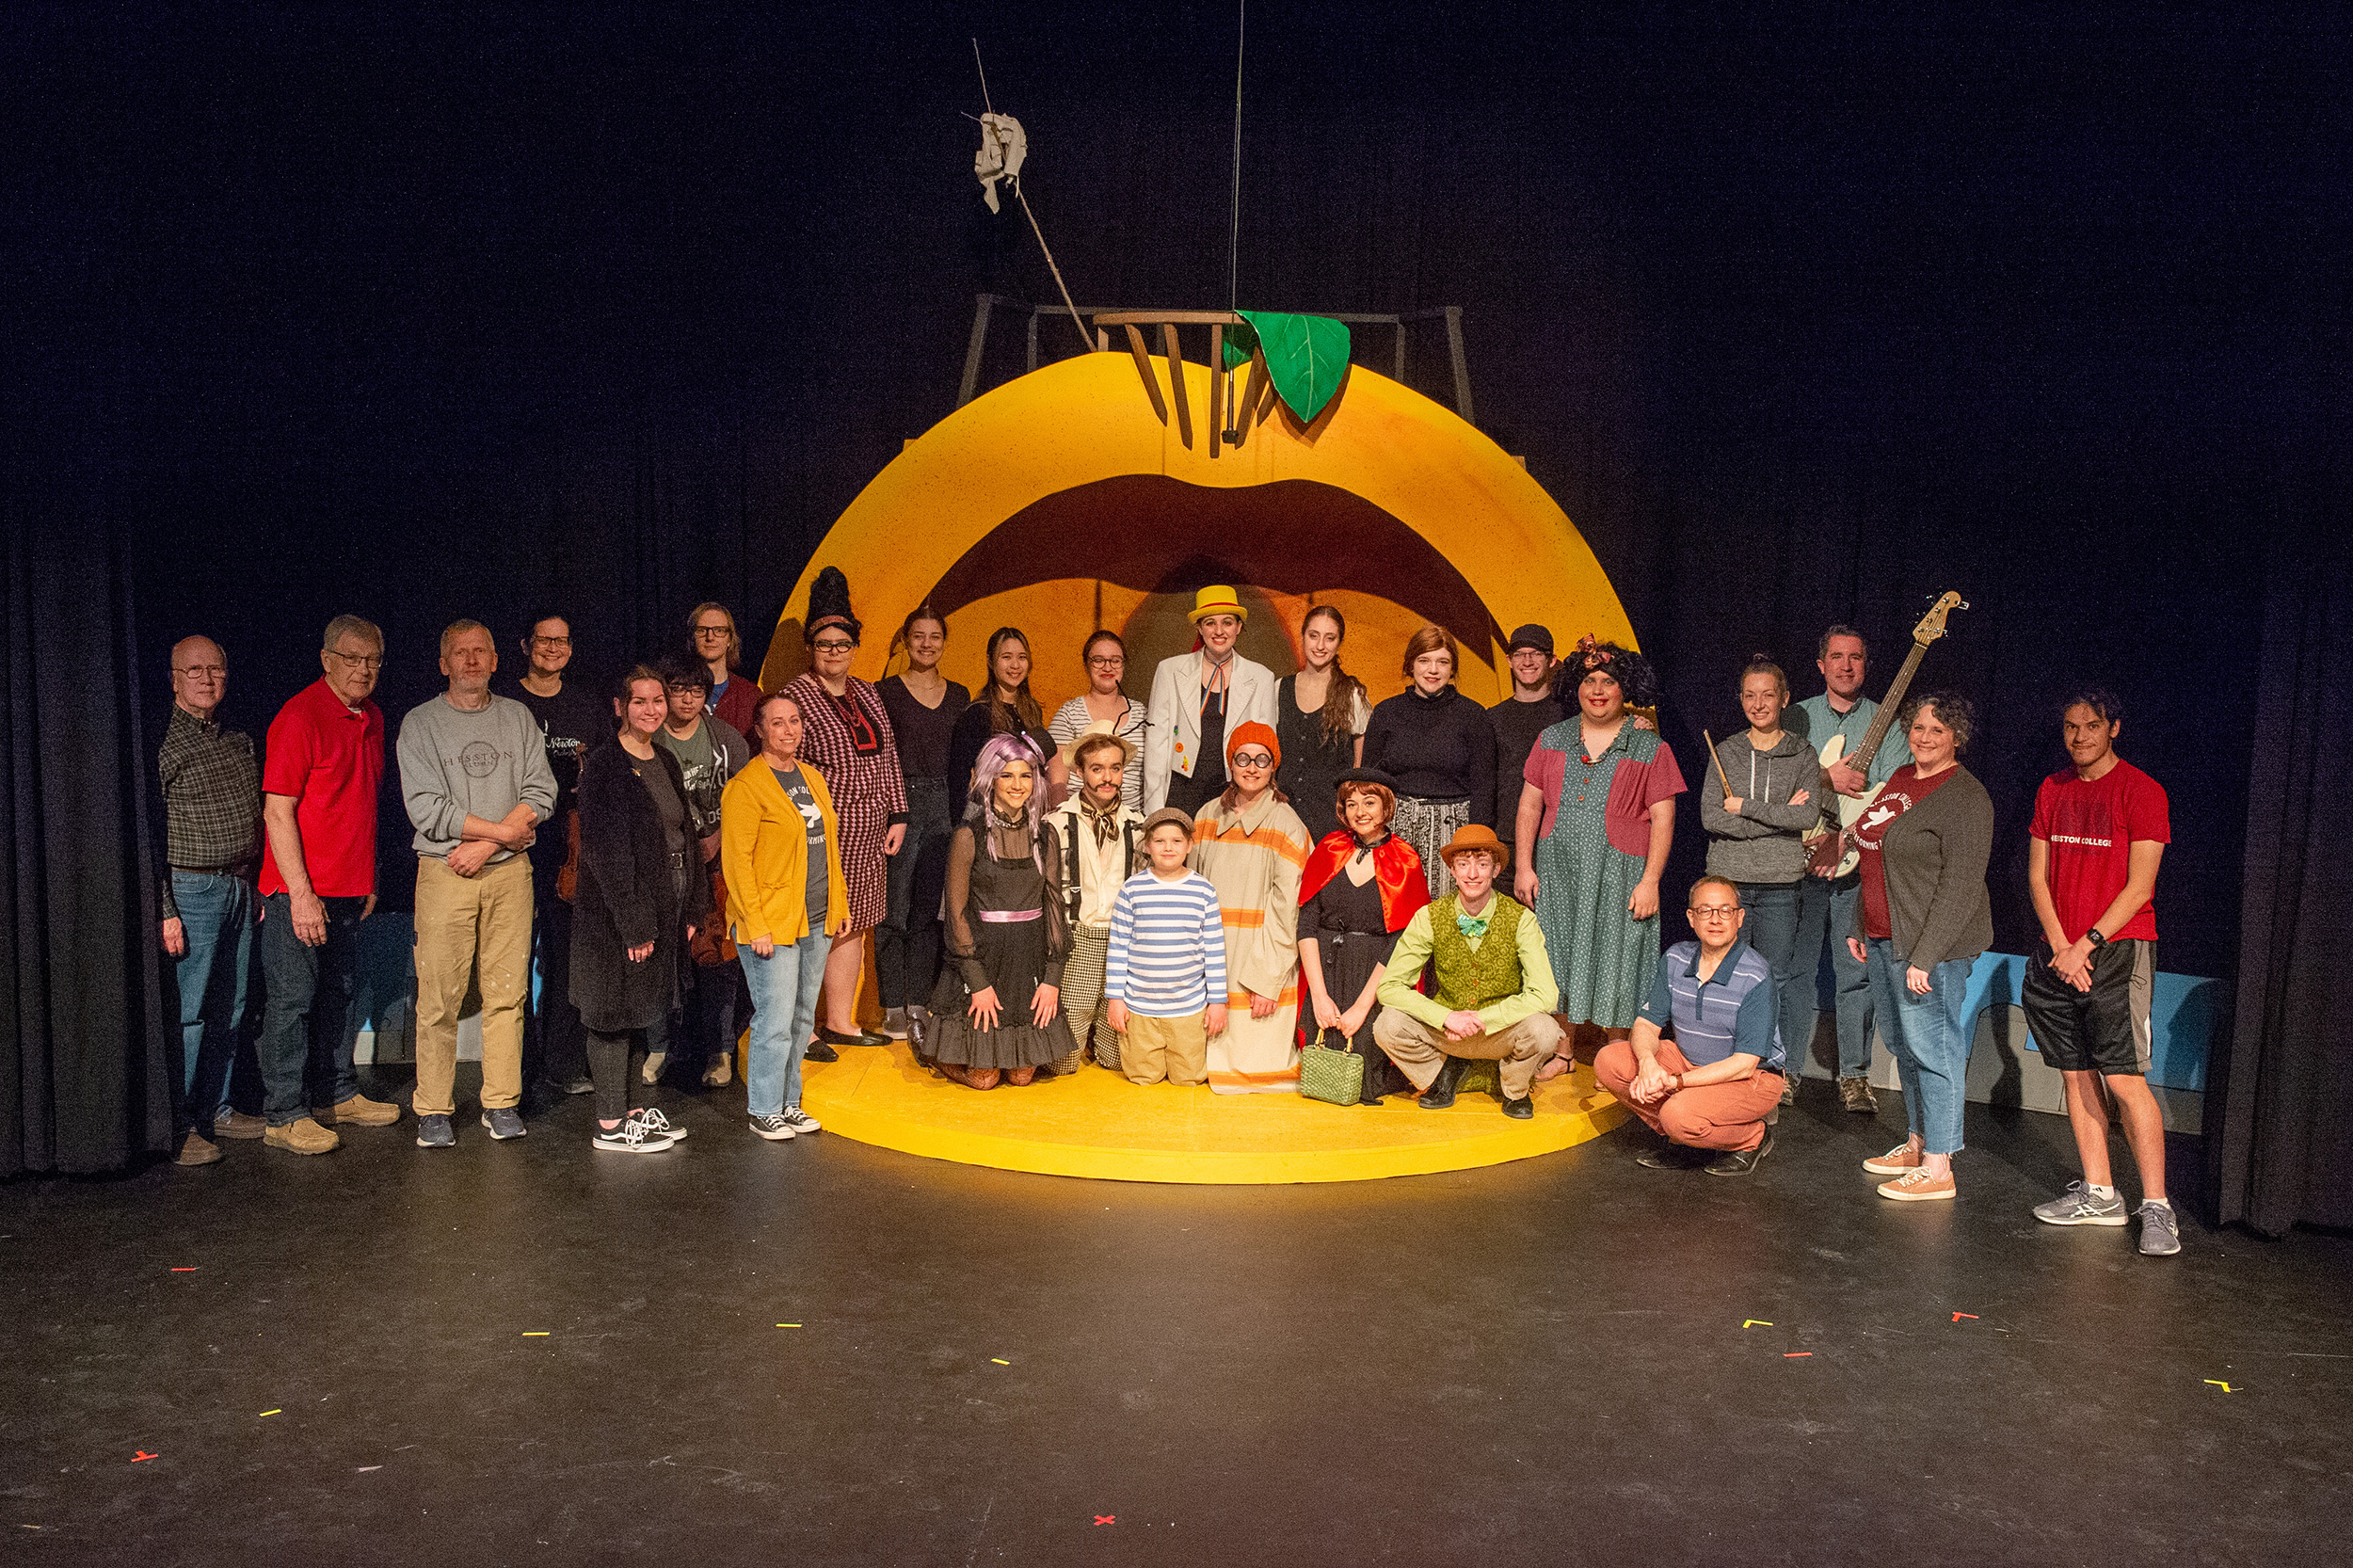 Cast and crew photo from Hesston College production of James and the Giant Peach, spring 2022